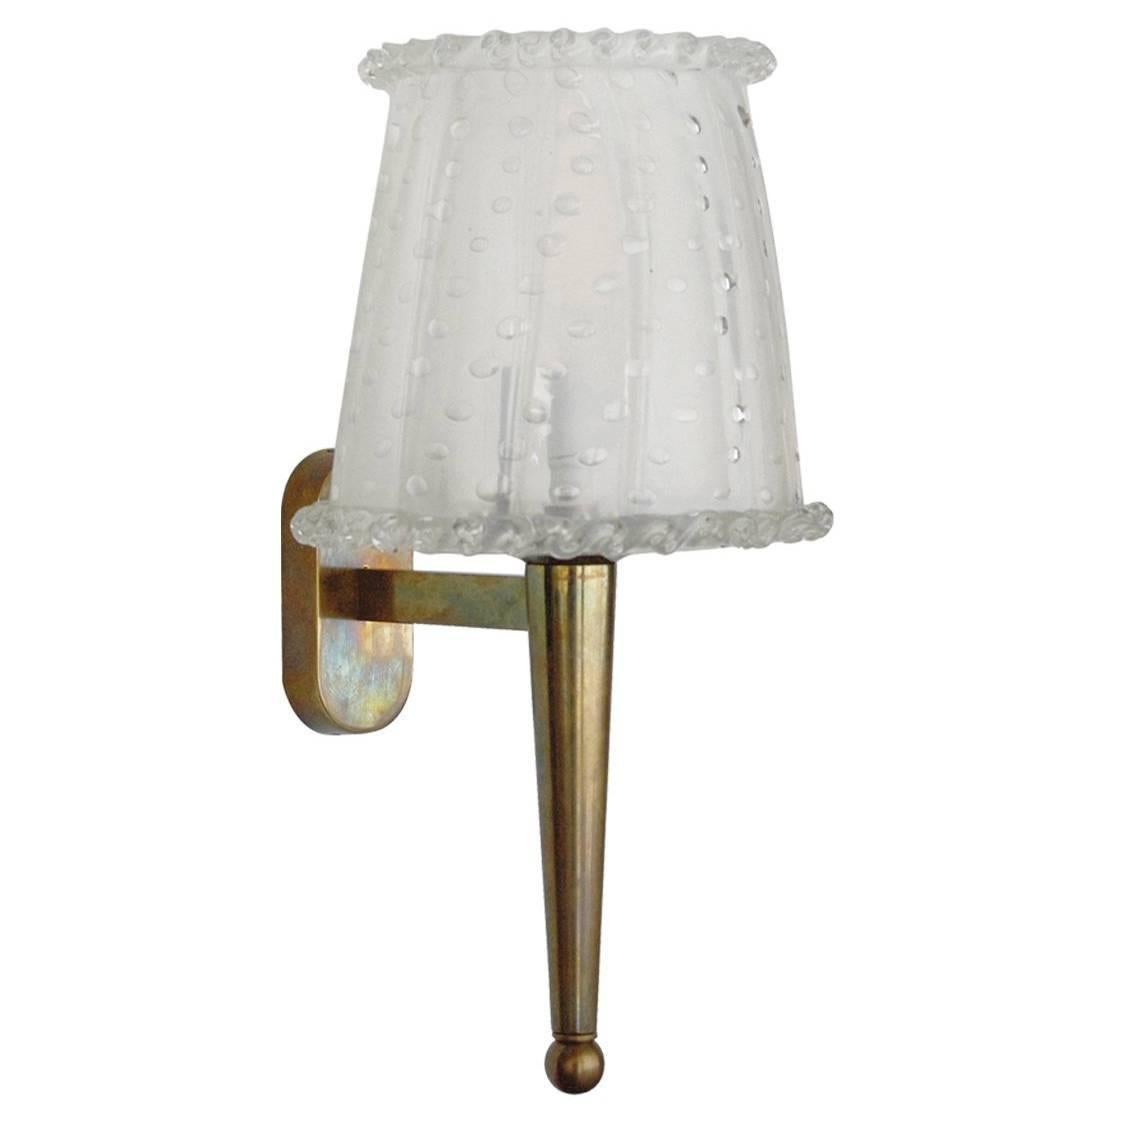 Vintage Italian sconces with lightly frosted clear Murano glass hand blown to produce a lamp shade with bubbles within the glass in Pulegoso technique mounted on a brass bracket / Made in Italy in the 1960’s.